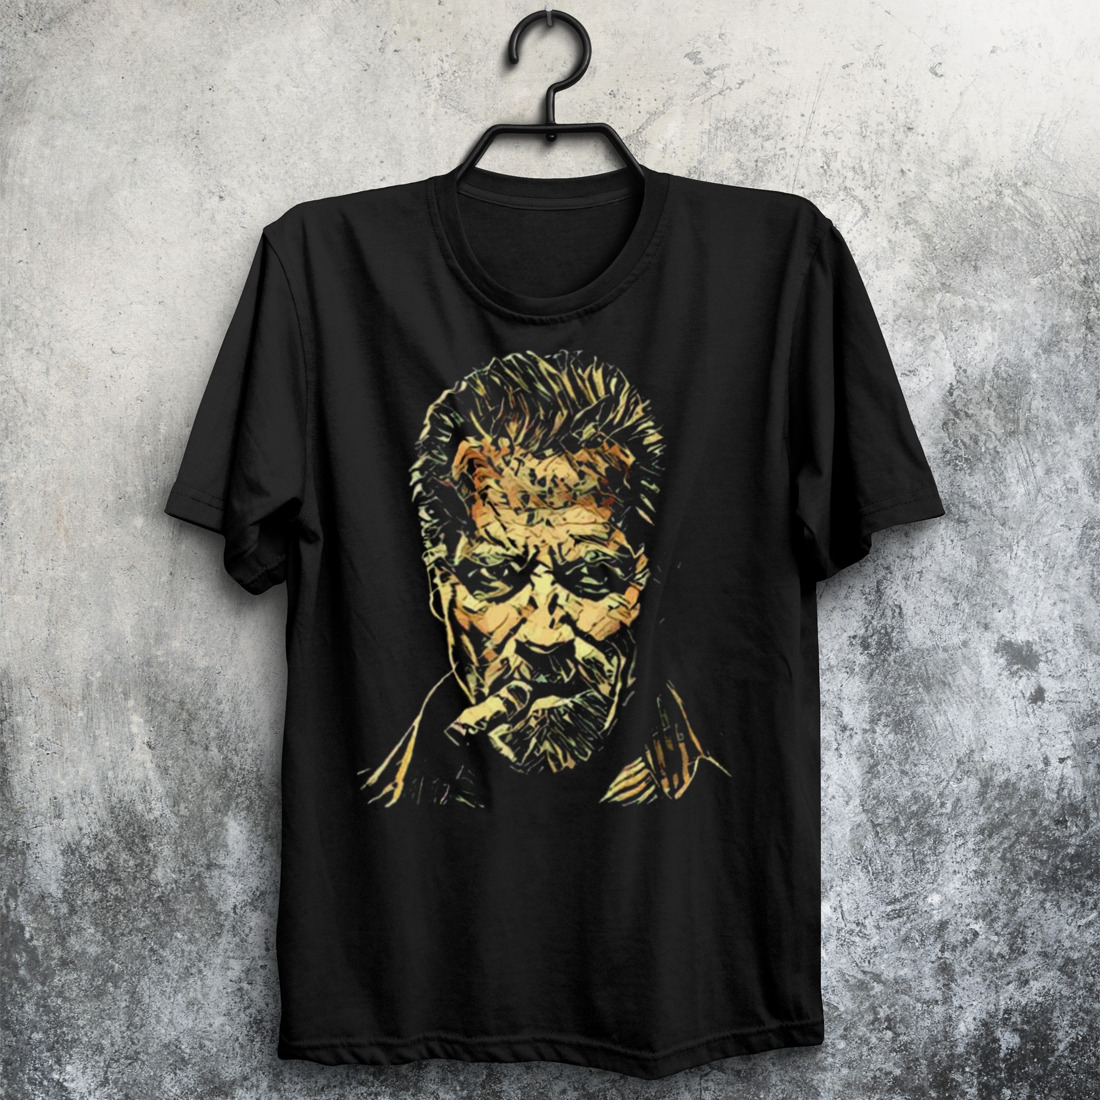 Arnold The Expendables shirt